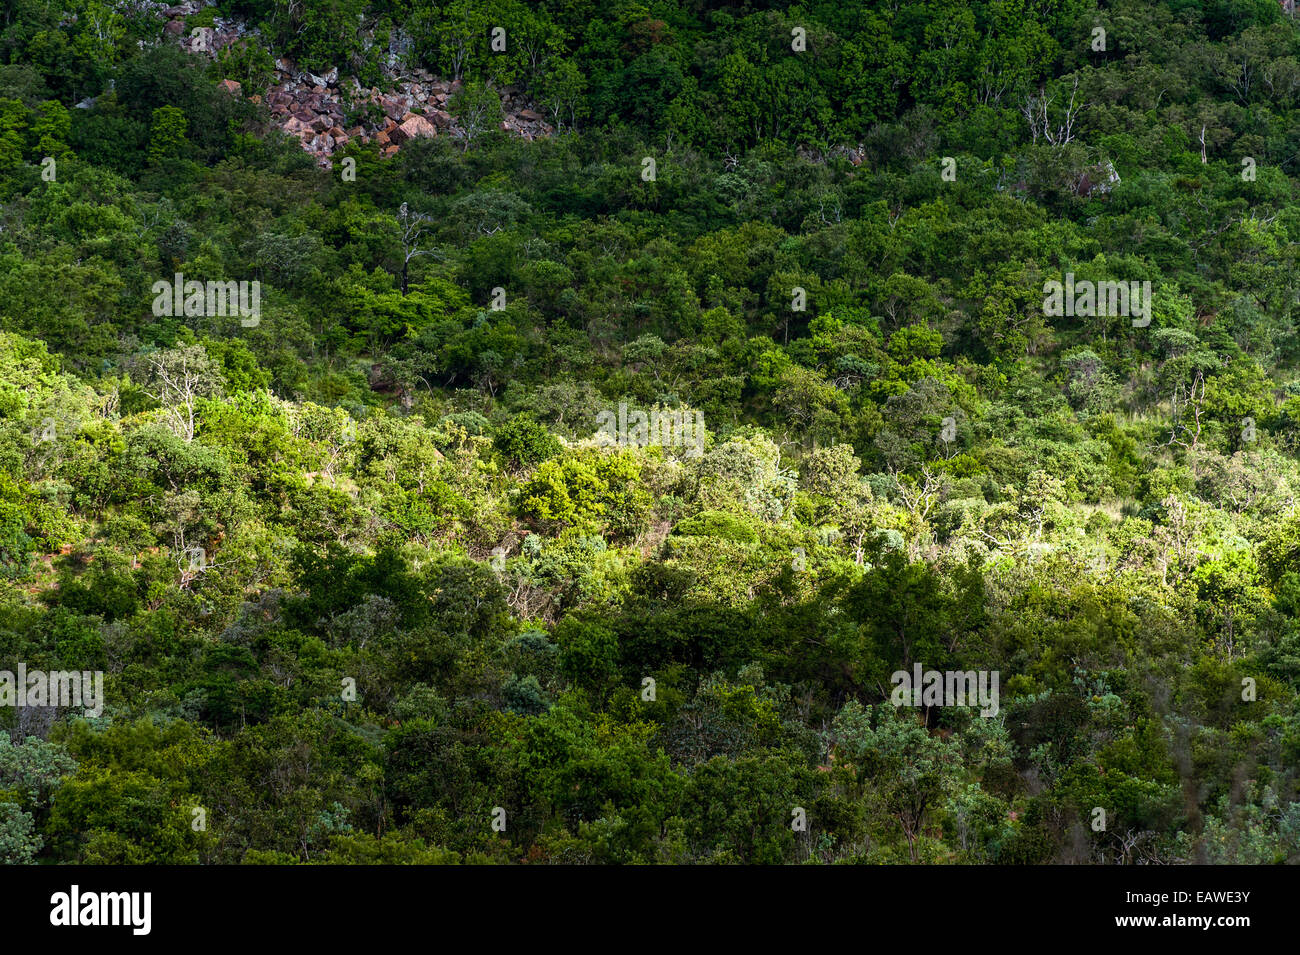 A sun ray illuminates a patch of dense, green forest canopy. Stock Photo